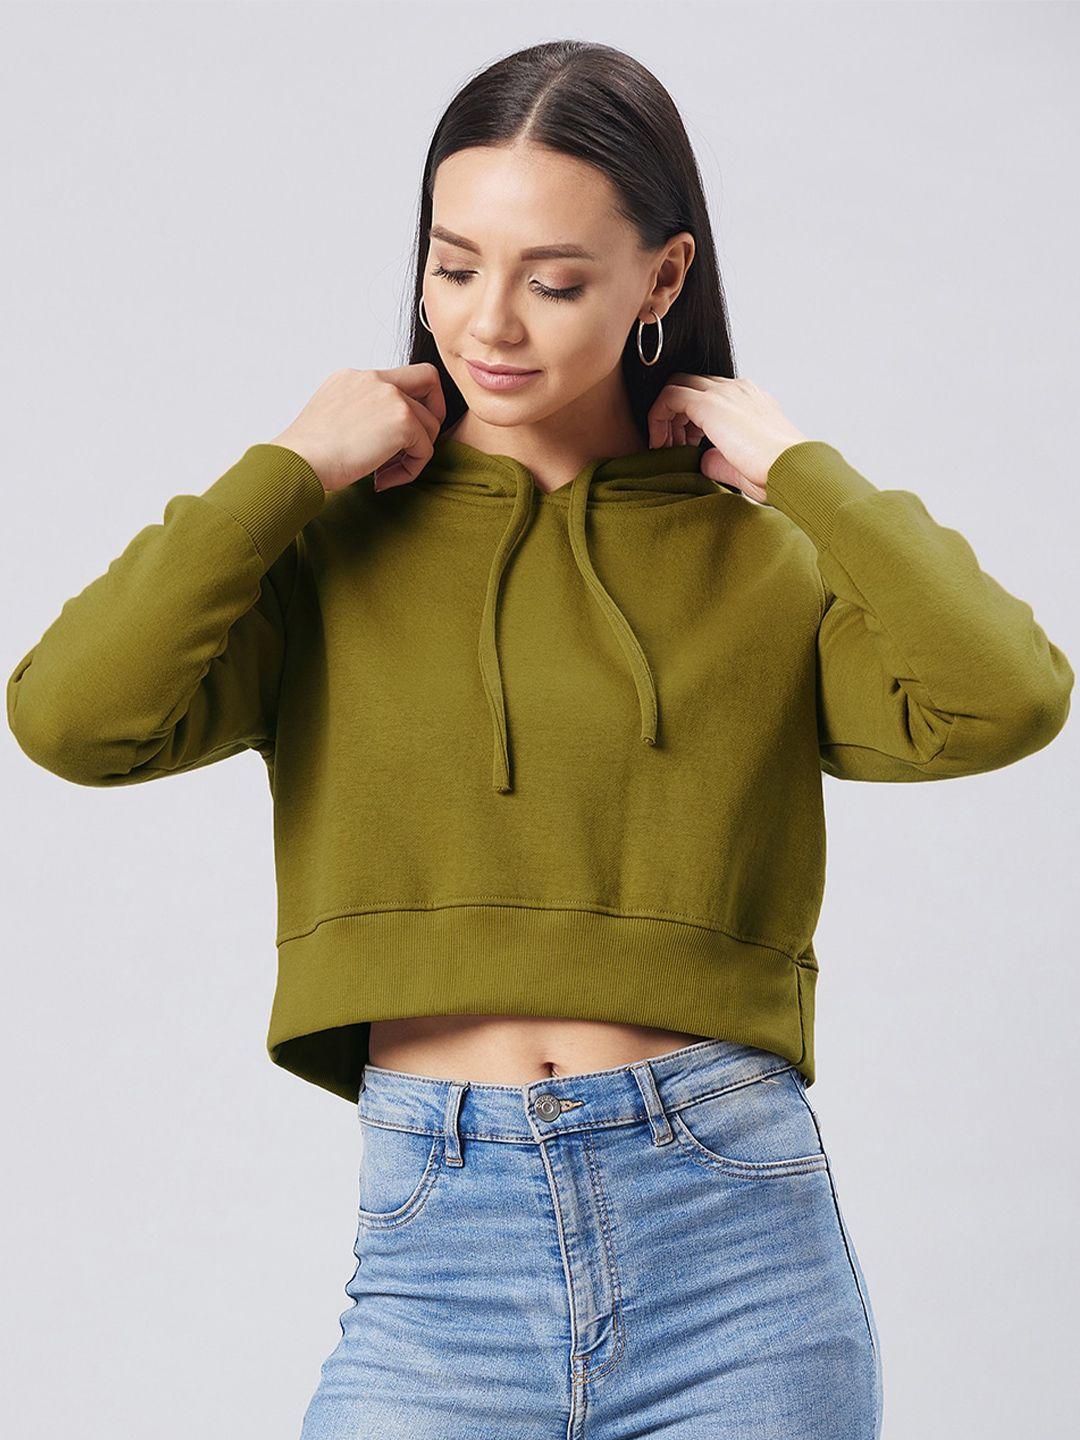 dolce crudo women olive green solid cropped hooded sweatshirt